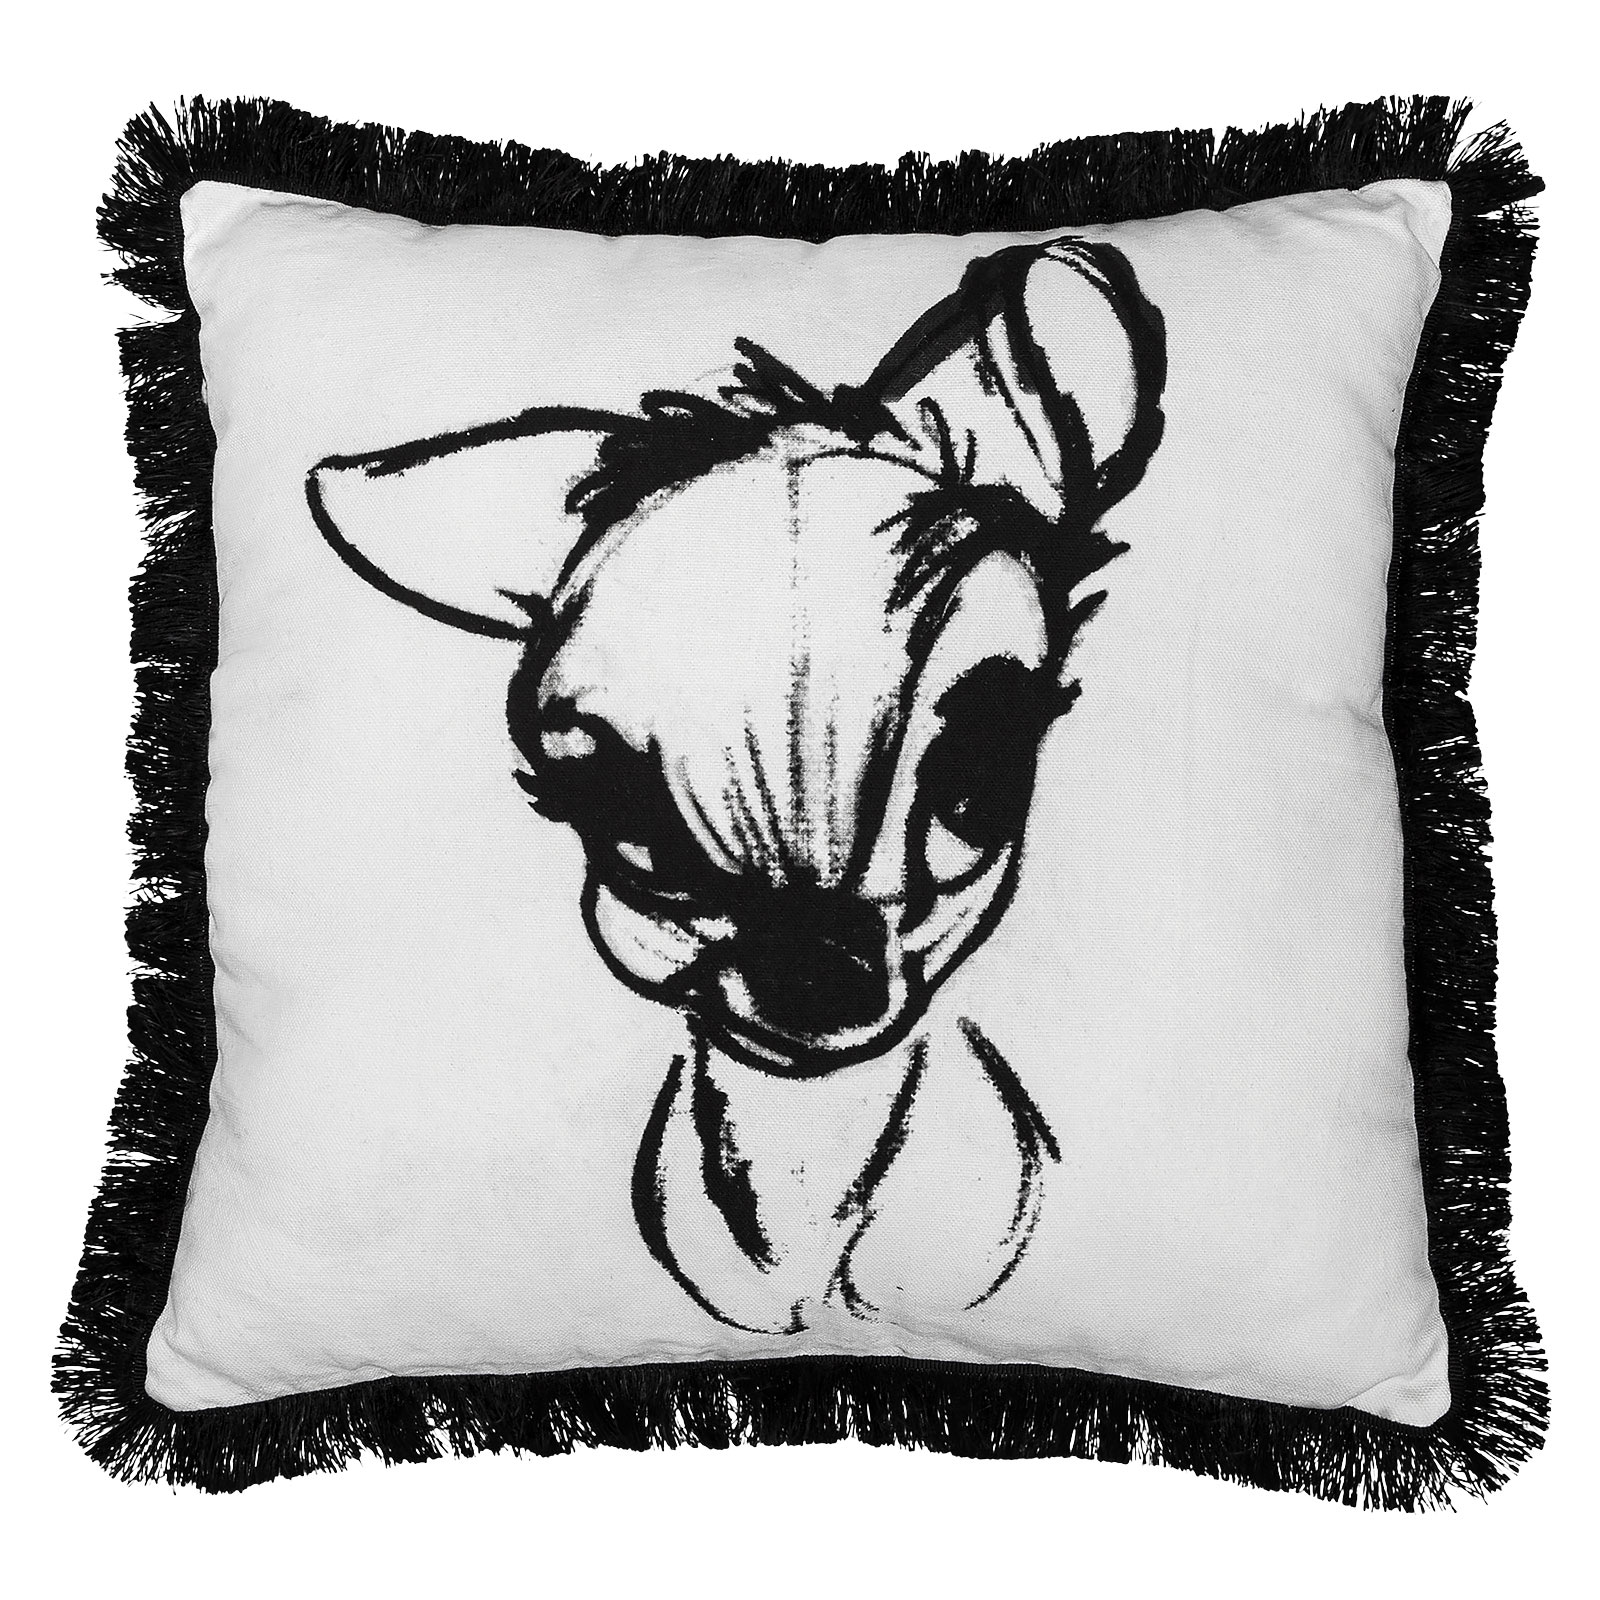 Bambi - Portrait Pillow with Fringes